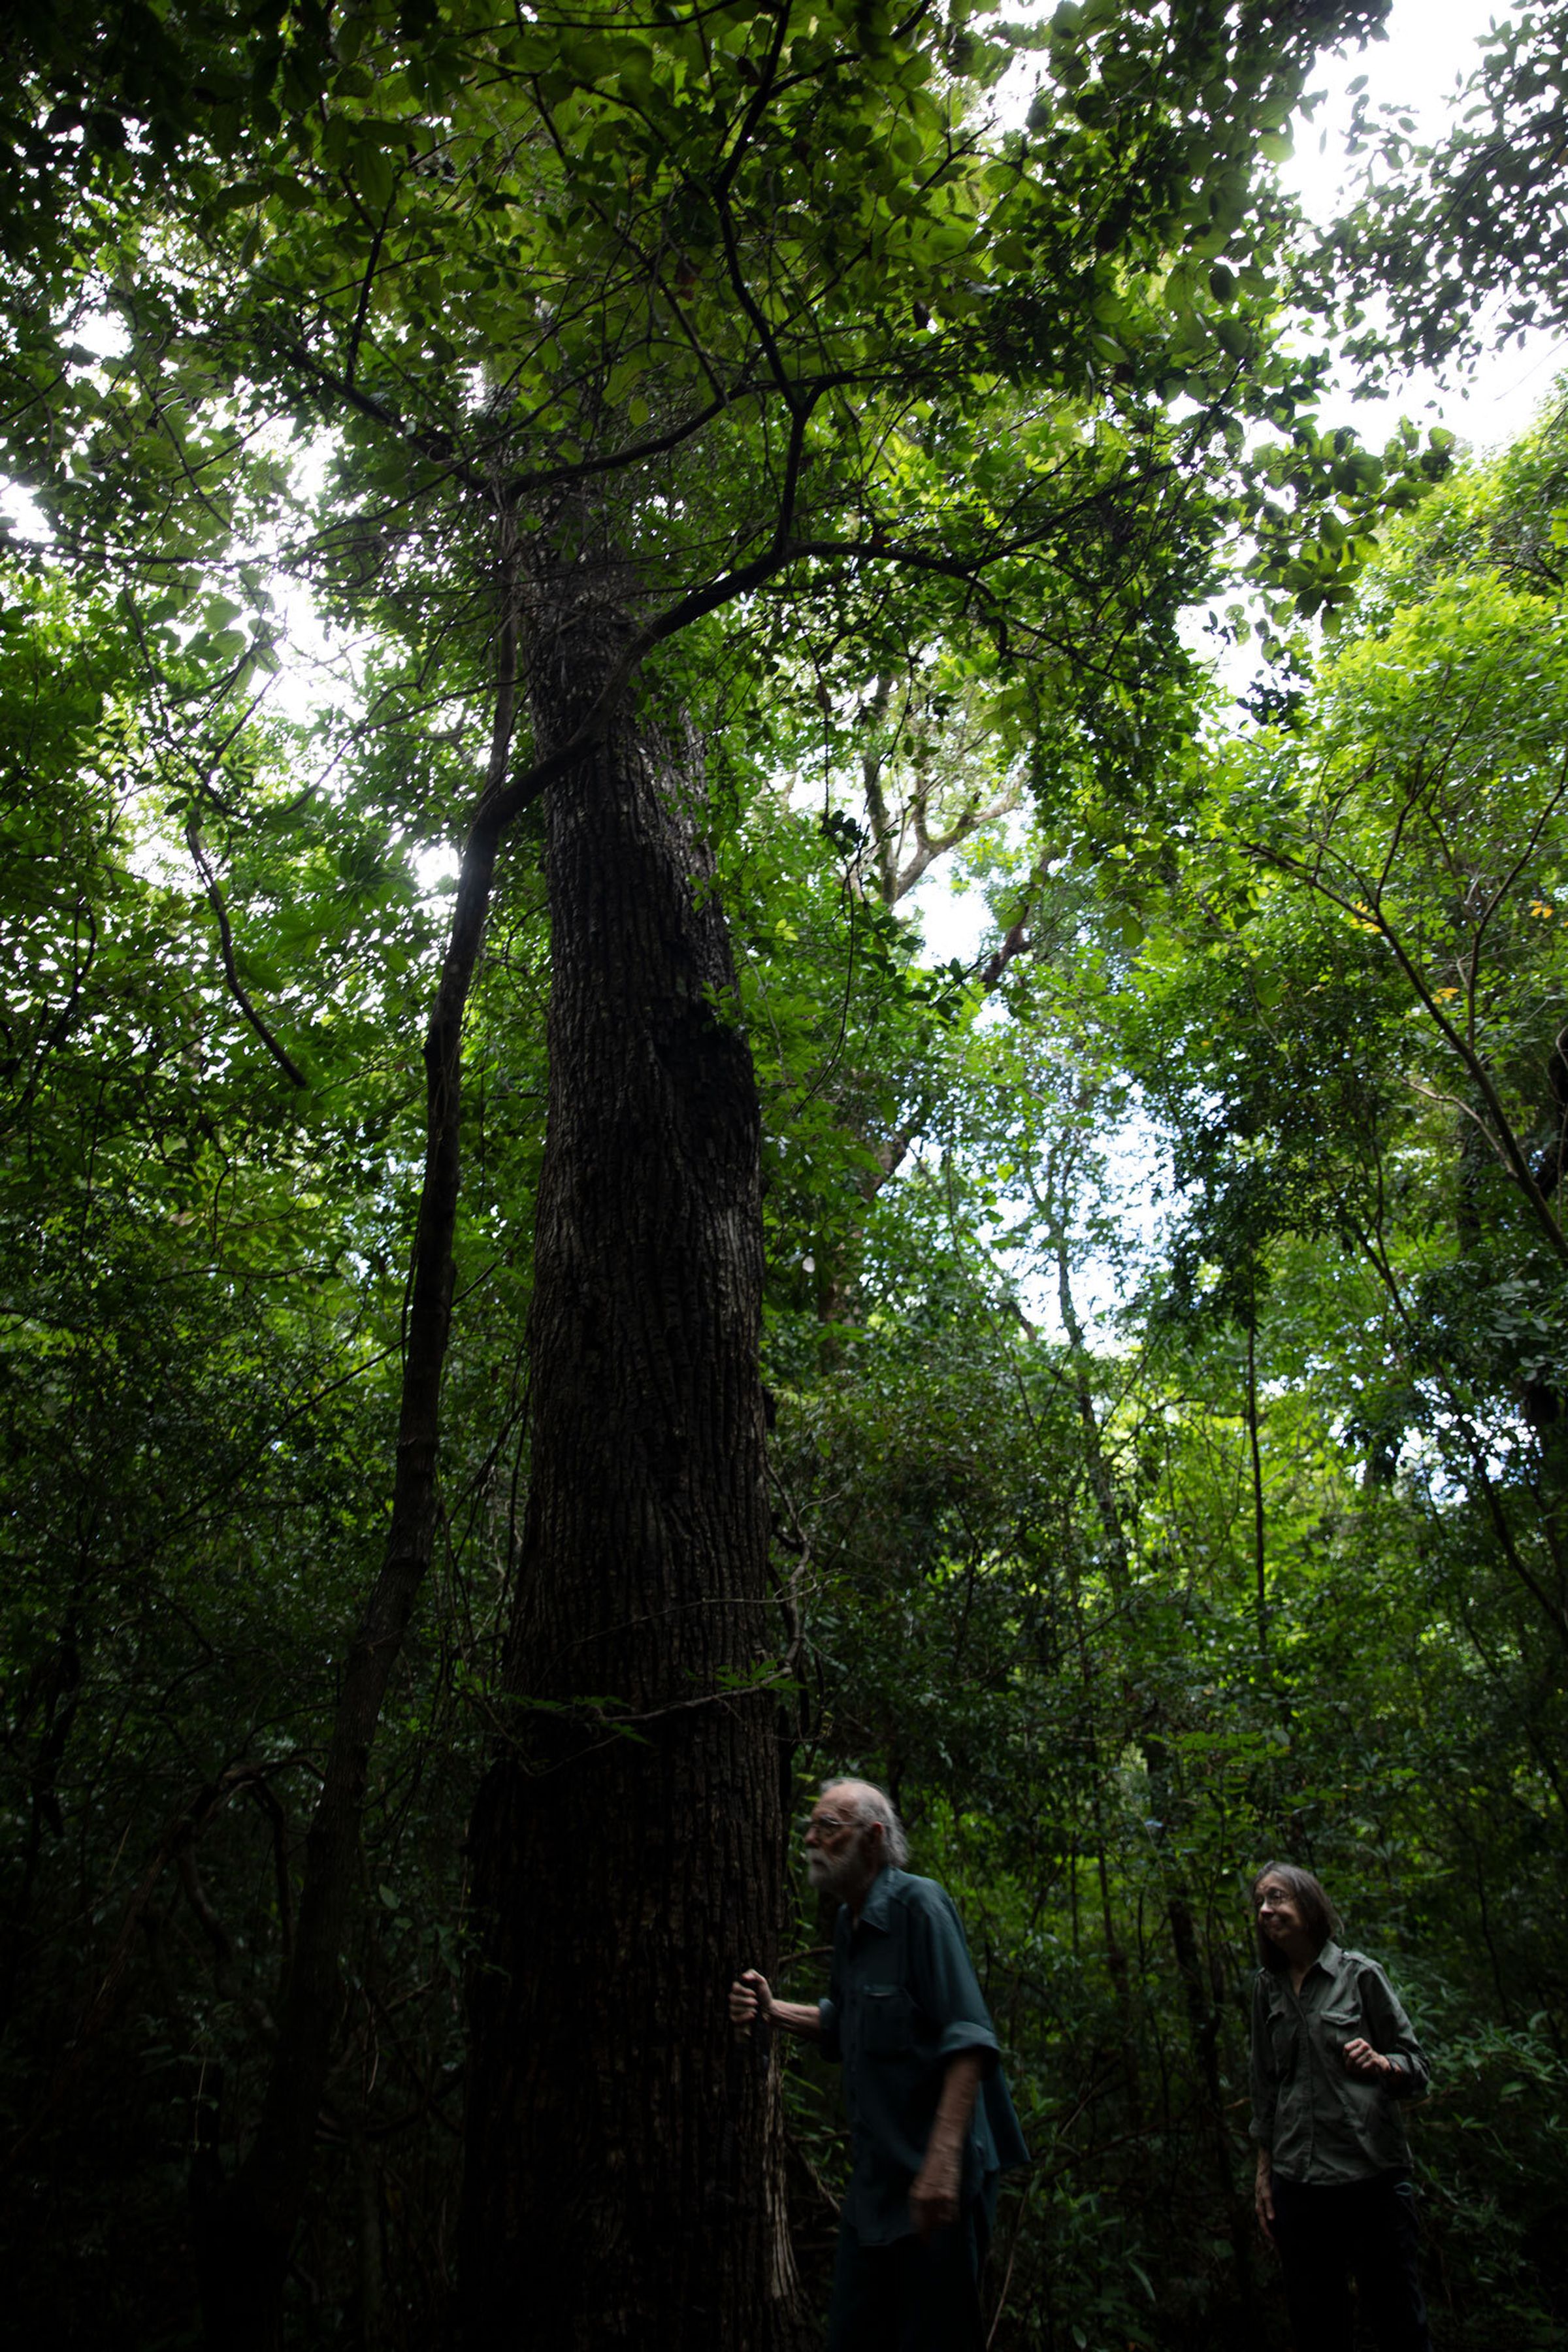 A man and woman walk beneath a thick forest canopy, next to a very tall, old tree.